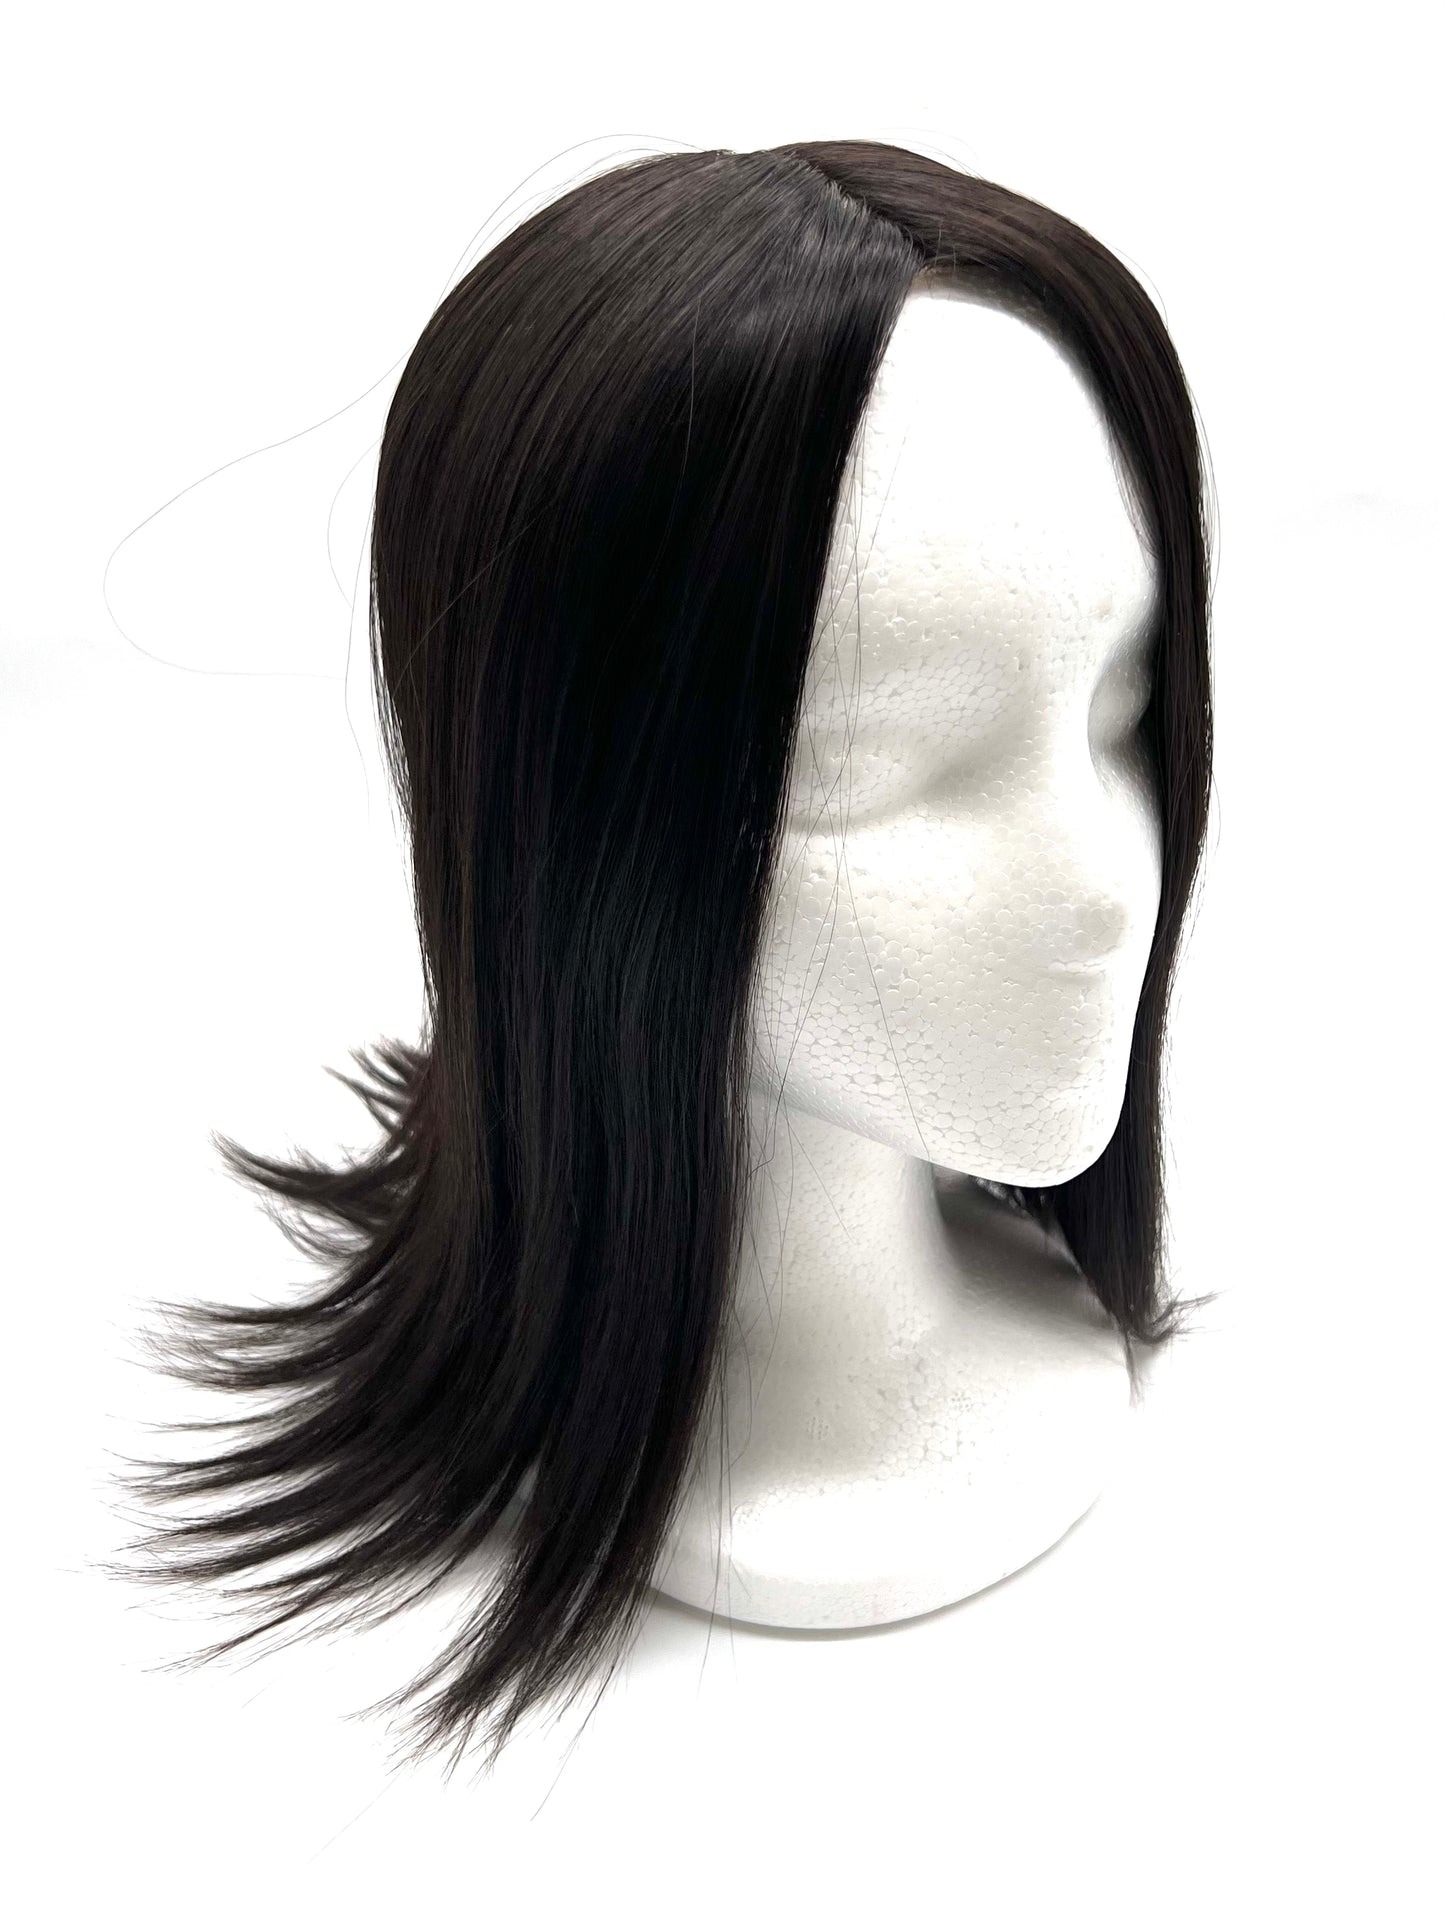 Cuticle Remy Human Hair Toppers Silk Base Women Toupee